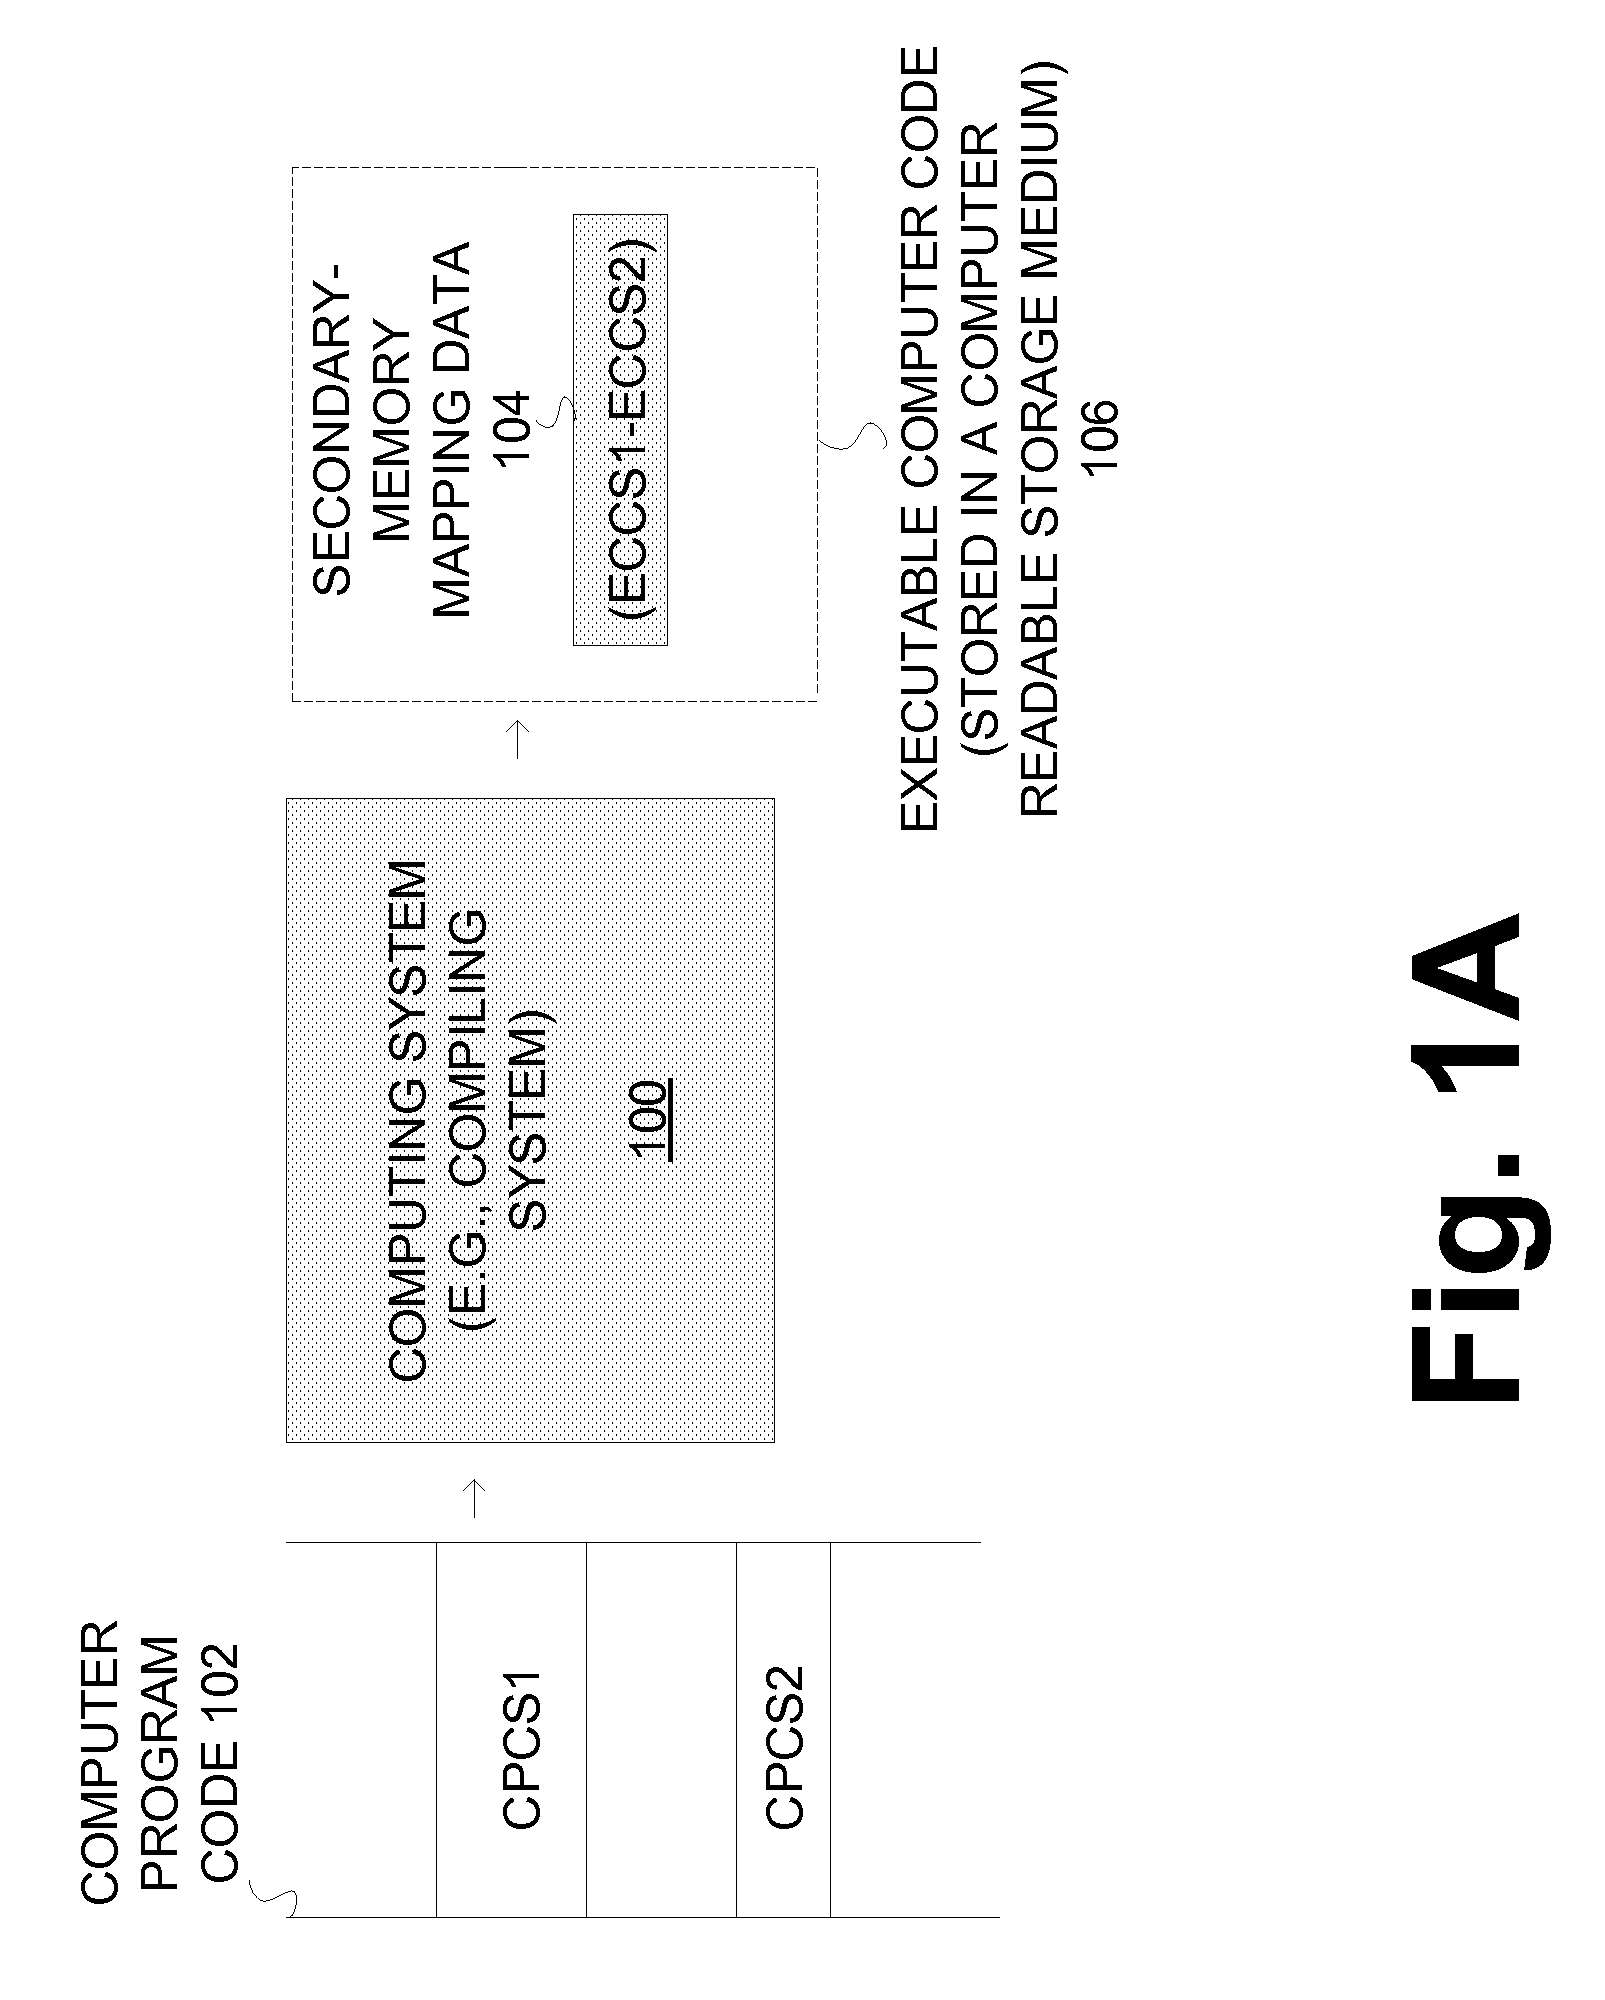 Effective mapping of code sections to the same section of secondary memory to improve the security of computing systems